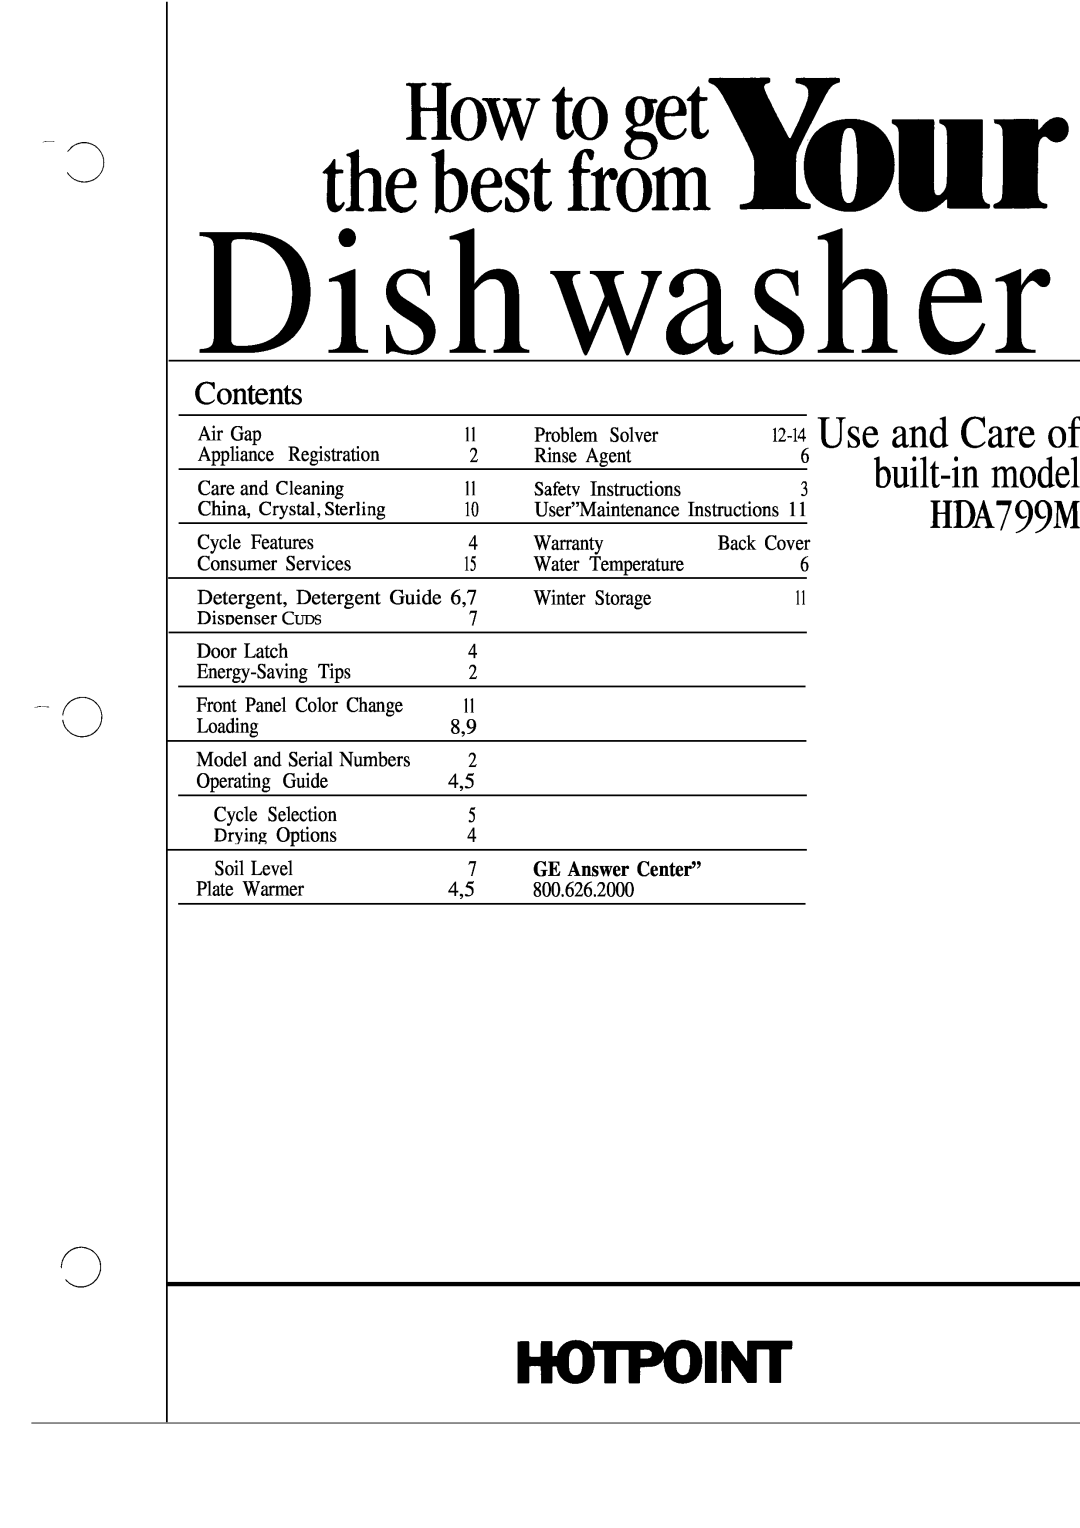 Hotpoint HDA799M warranty Dishwasher, the\ T iEYOUr, Use and Care of, built-inmodel, Conkn@ 